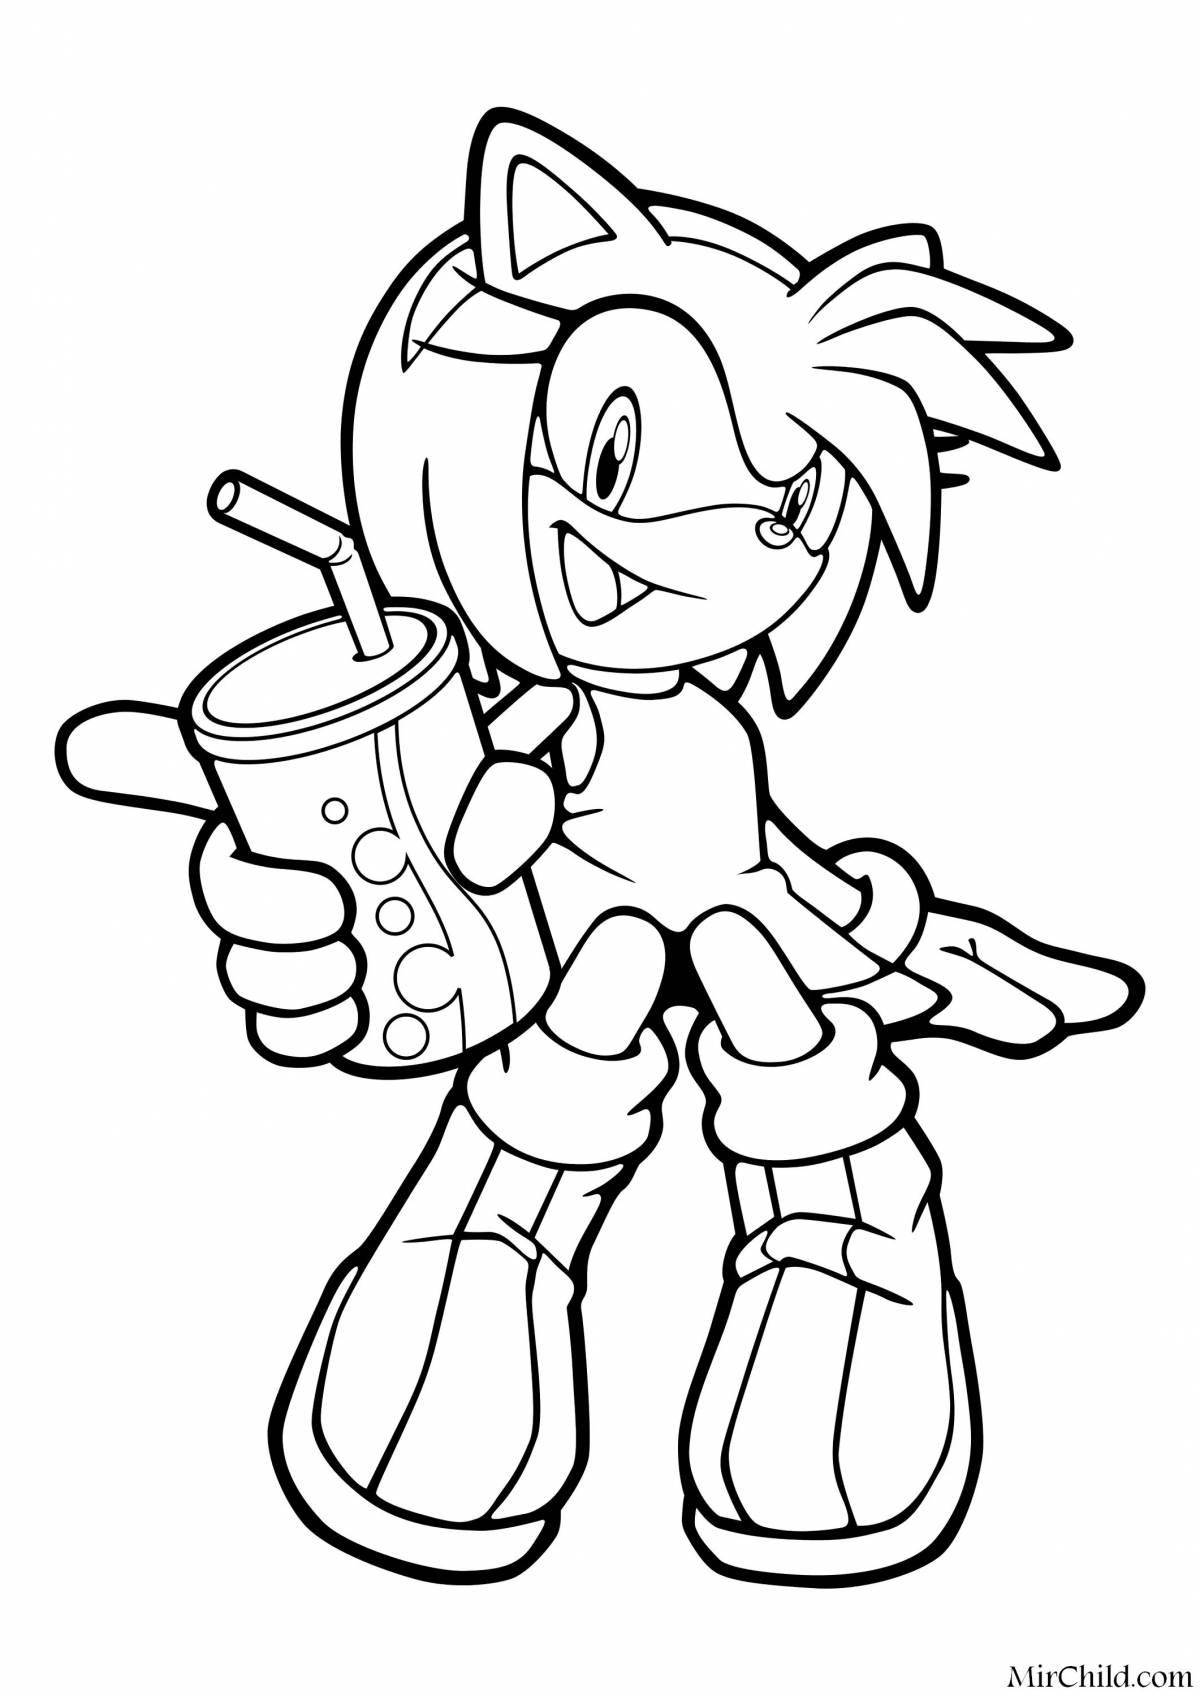 Sonic and amy rose glowing coloring book